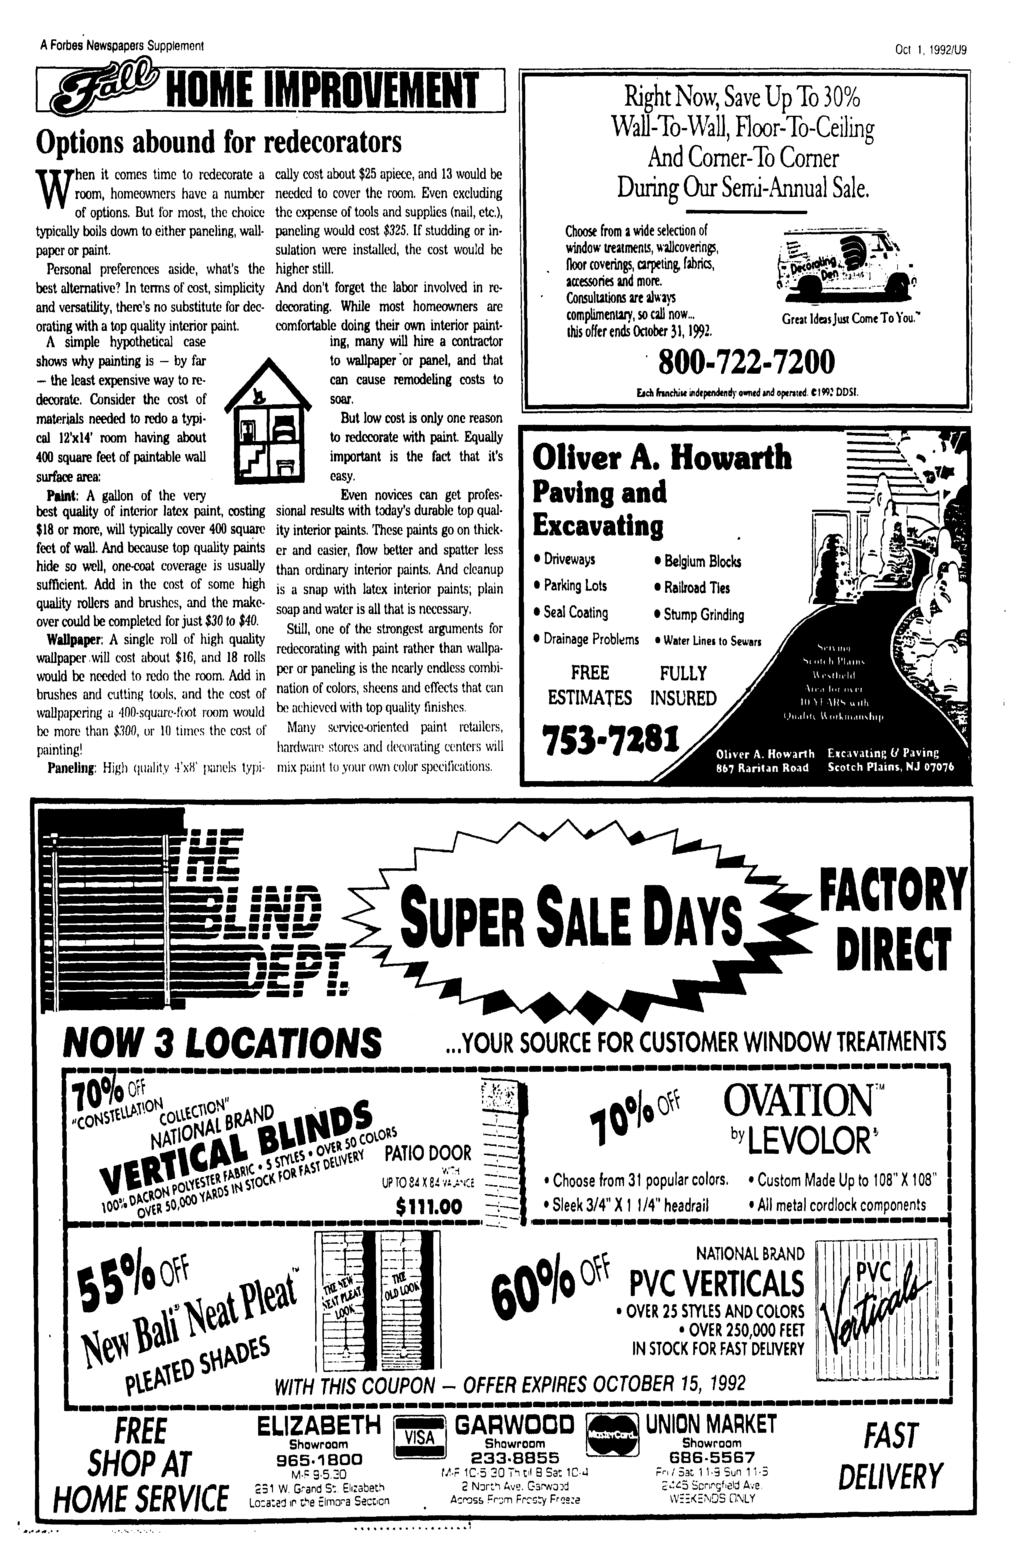 A Forbes Newspapers Supplement Oct 1, 1992/U9 HOME MPROVEMENT Options abound for redecorators W hen it comes time to redecorate a room, homeowners have a number of options.